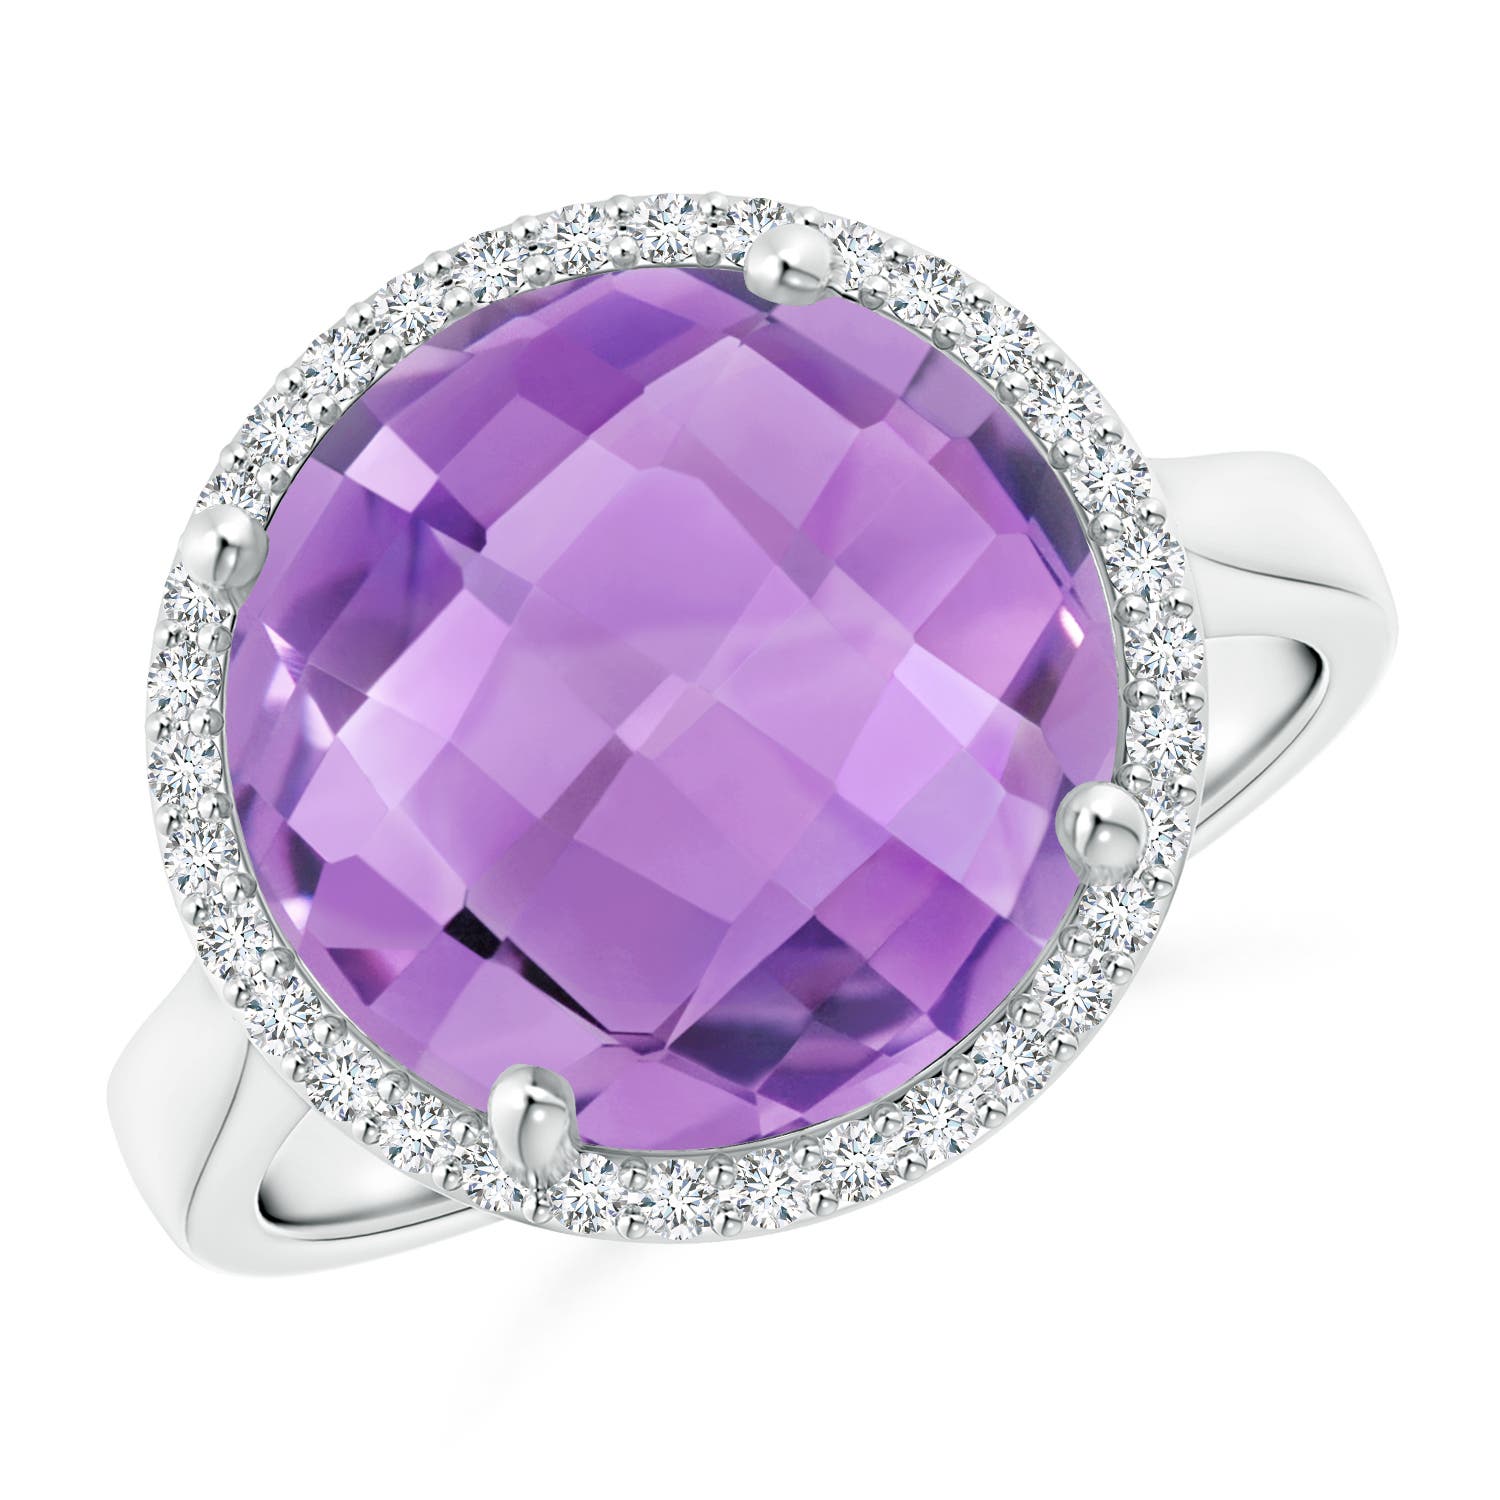 A - Amethyst / 5.7 CT / 14 KT White Gold